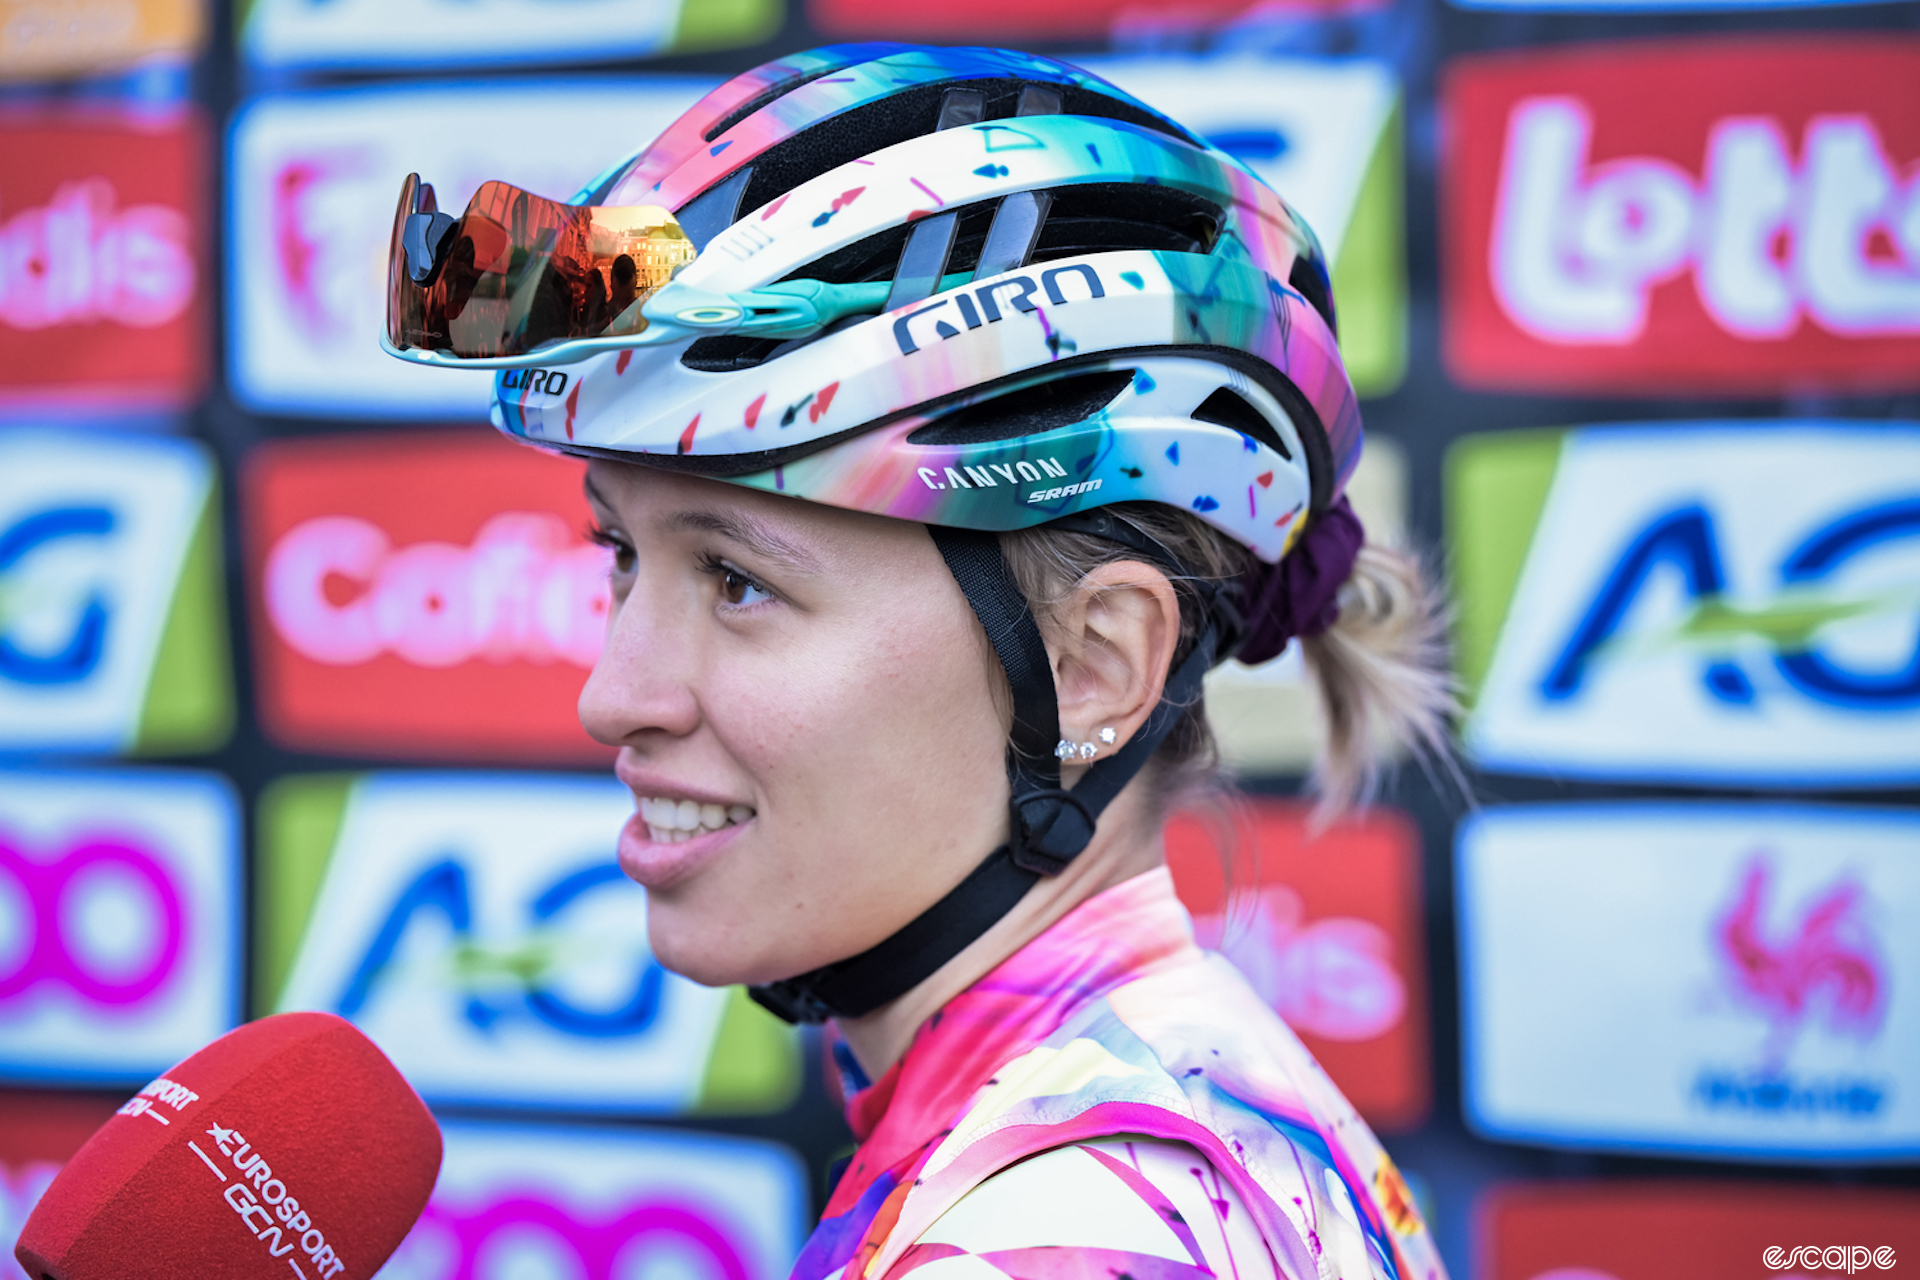 Kasia Niewiadoma talks to the press at la Fleche Wallonne Femmes. She's in the distinctive pink and white kit of her Canyon-SRAM team, with sunglasses tucked into the vents of her helmet, as she faces a Eurosport microphone.